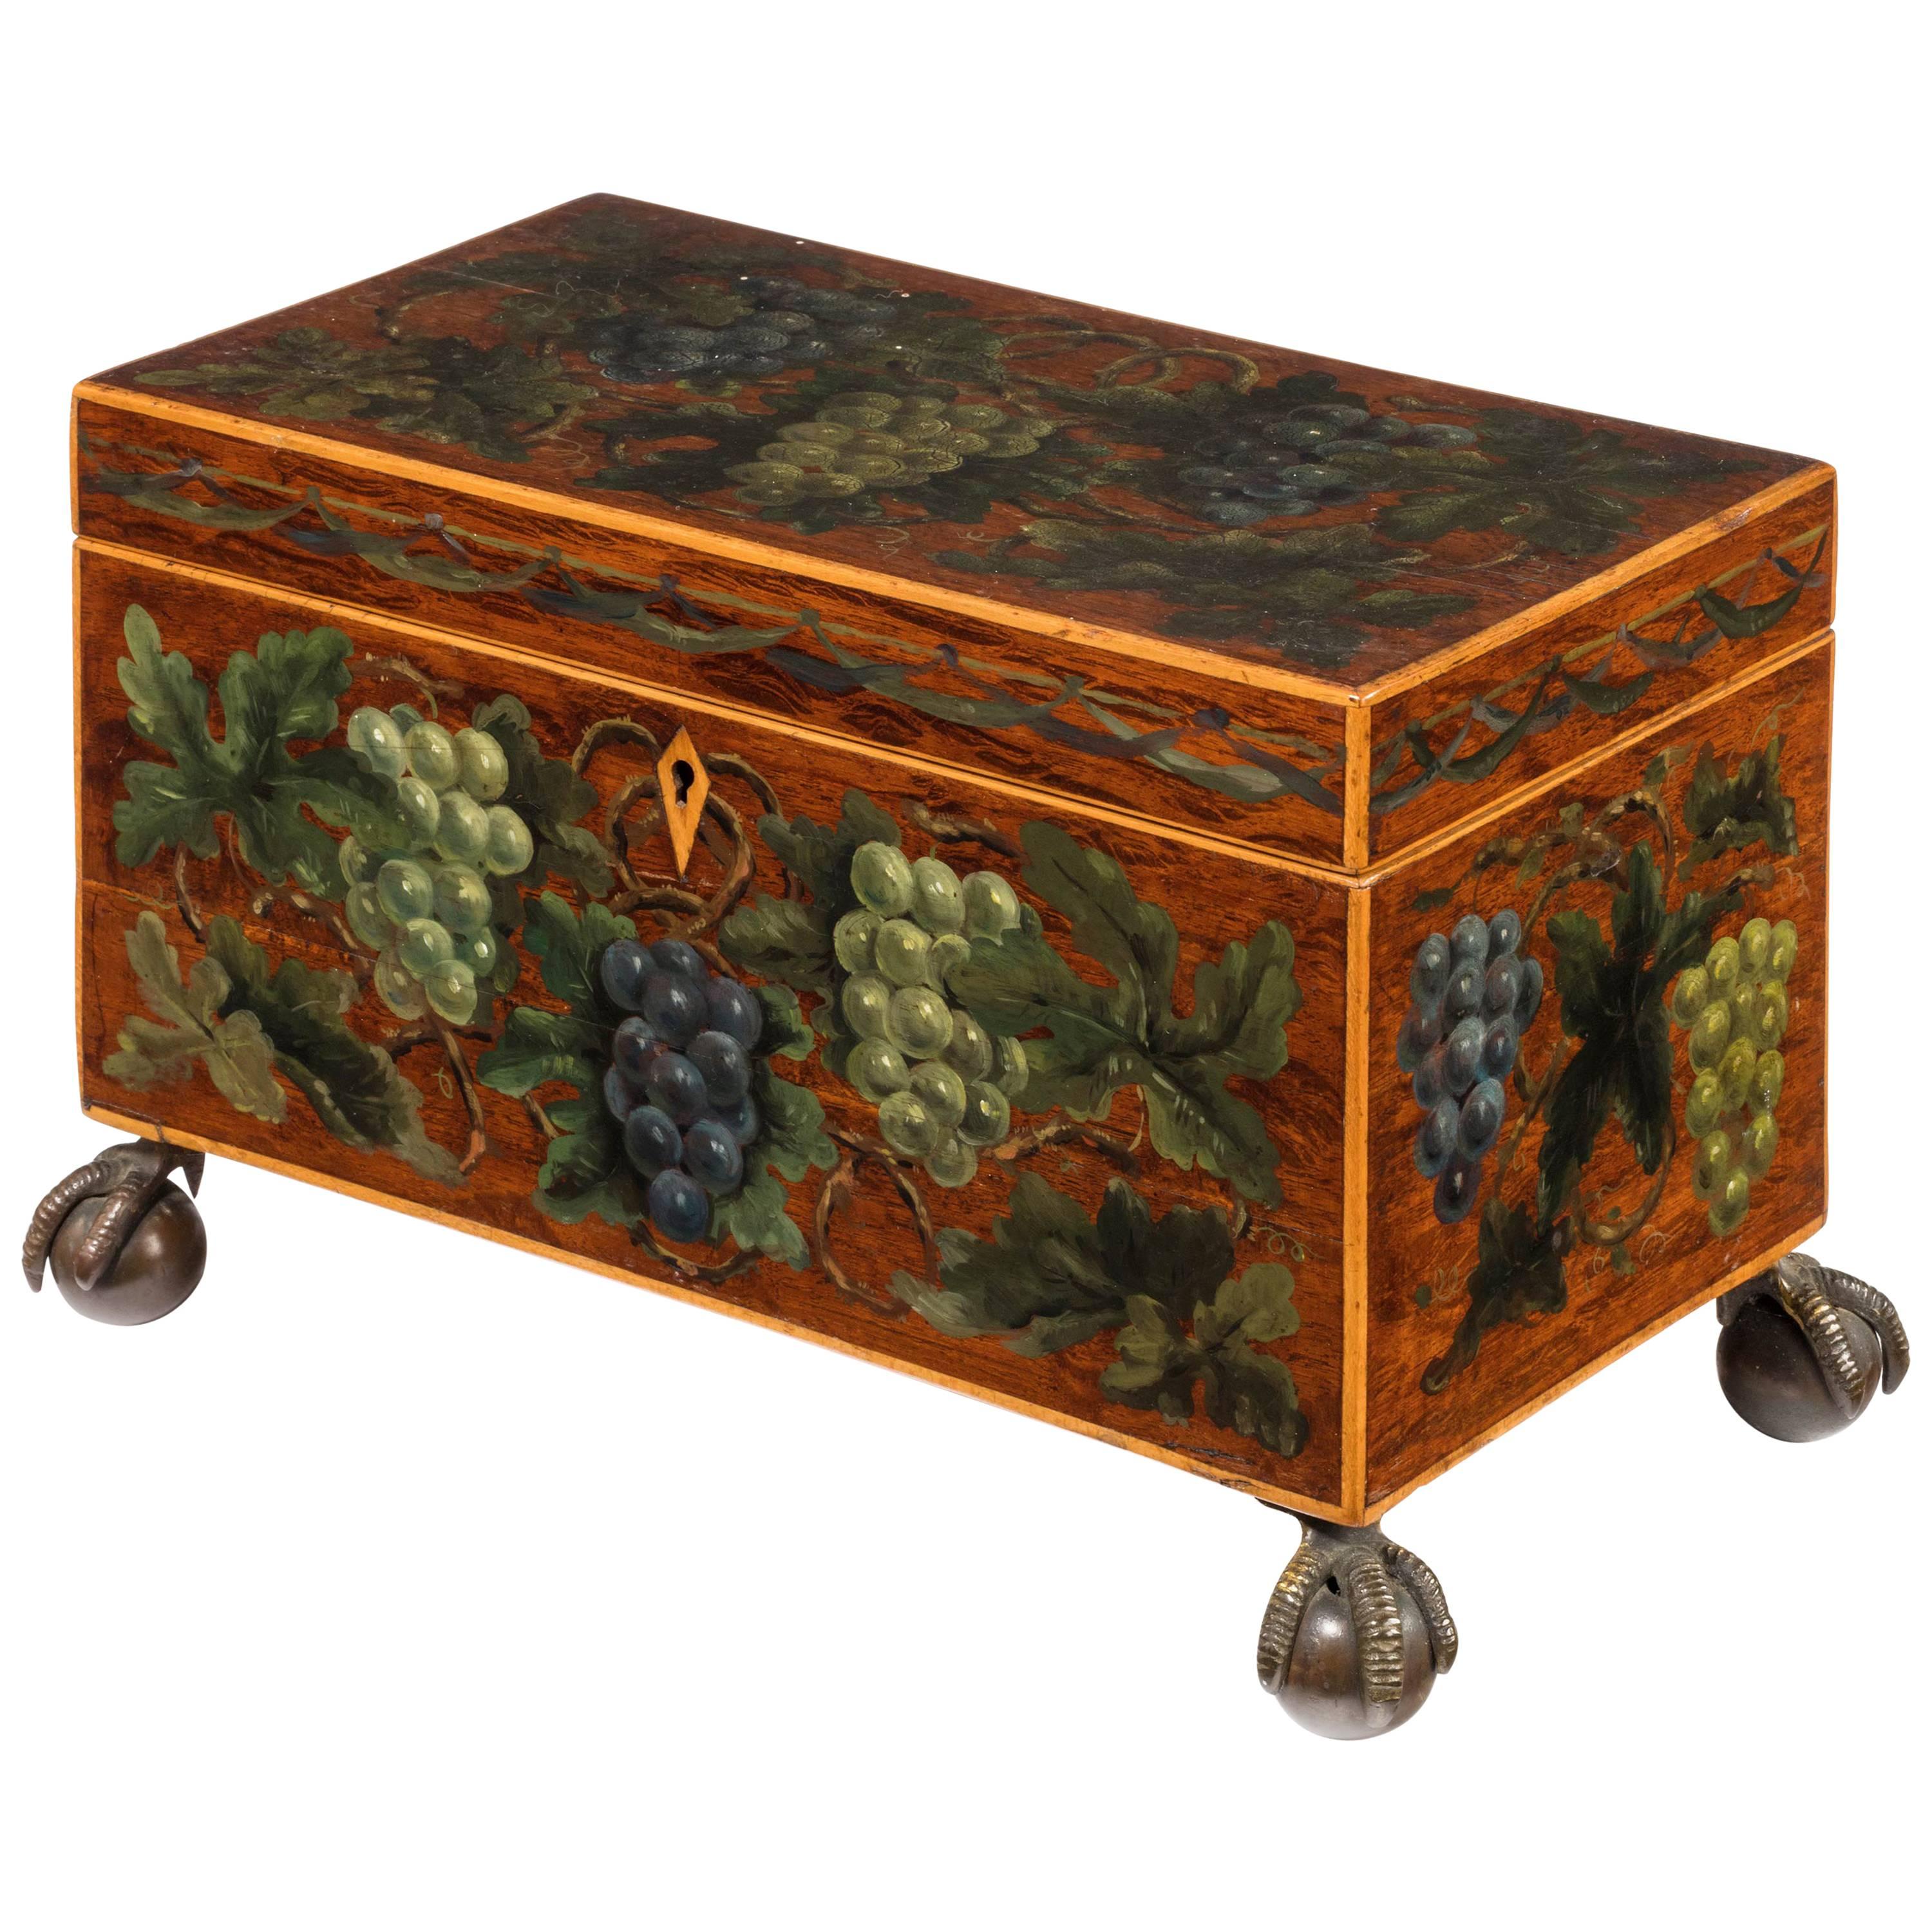 George III Period Mahogany Box Painted with Grapes and Foliage